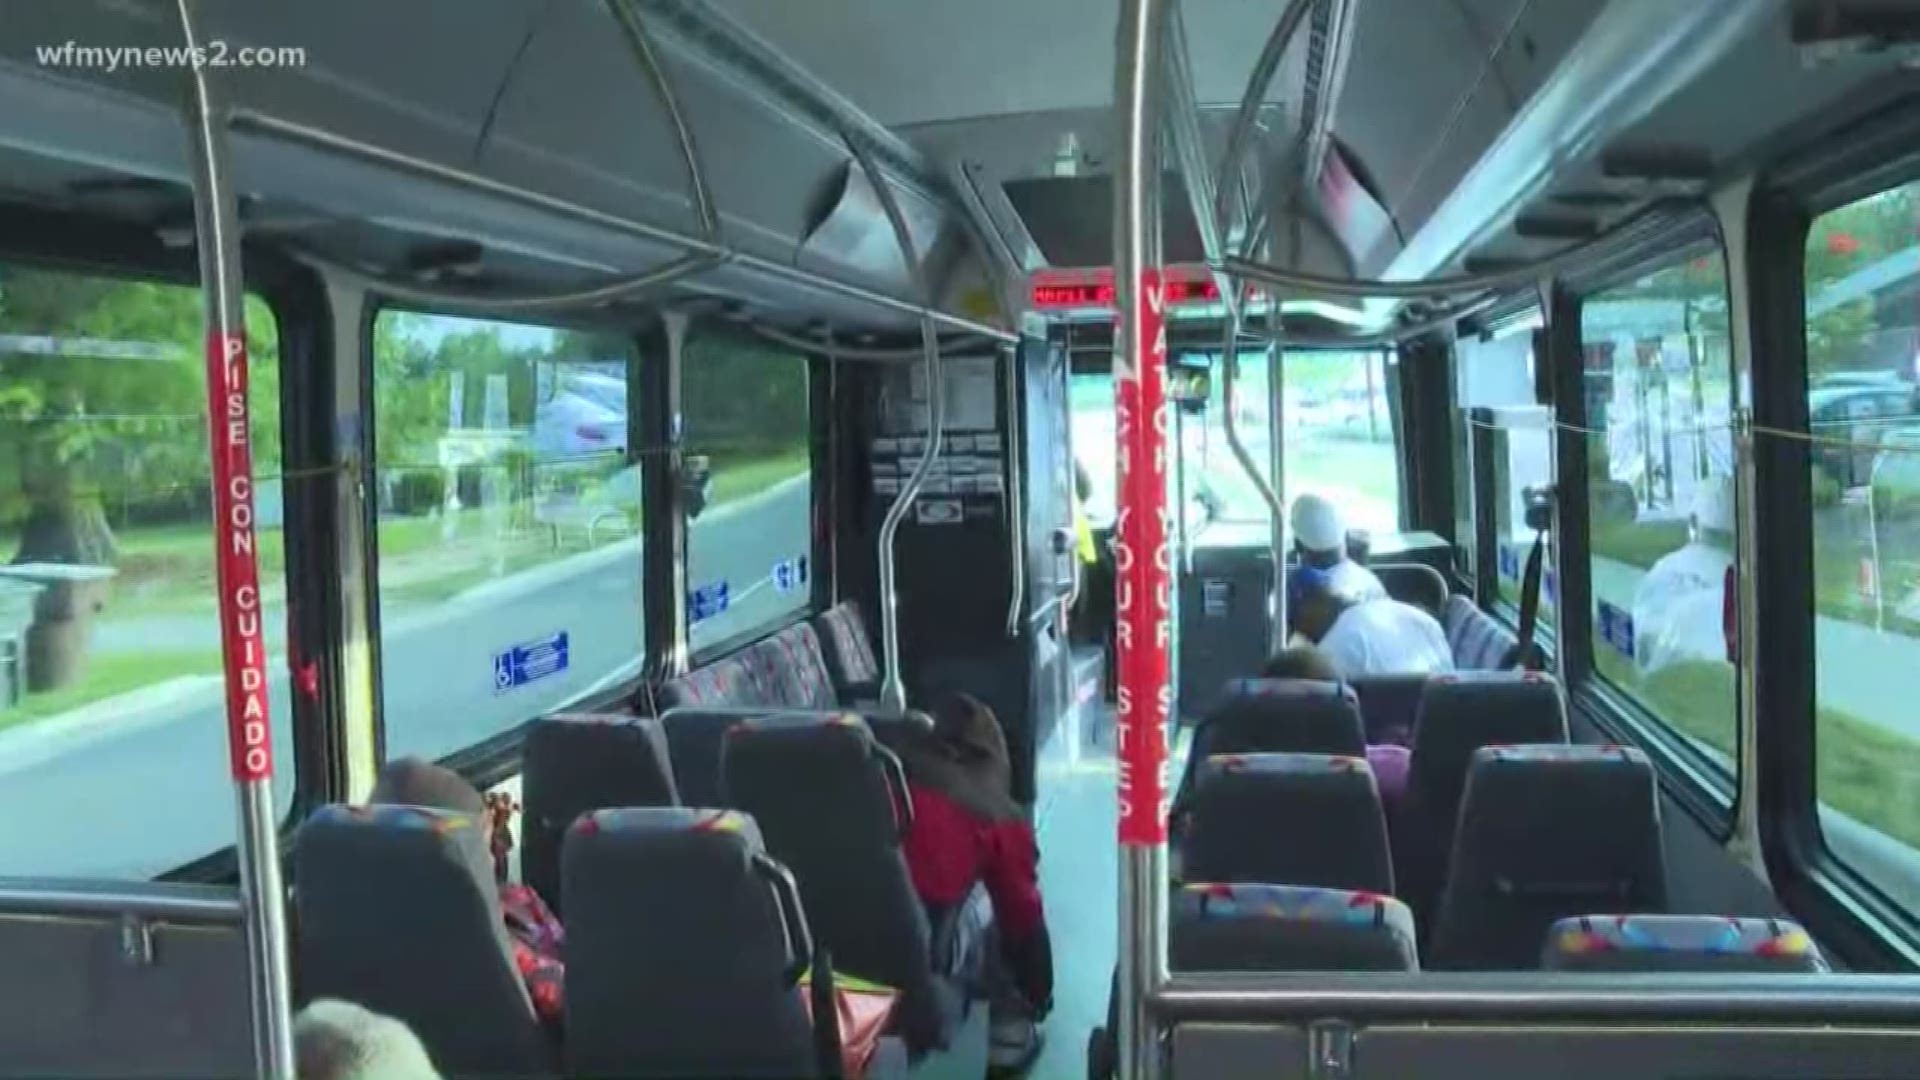 PART, GTA, HPTS, and WSTA will offer free rides on all bus routes on Thursday.